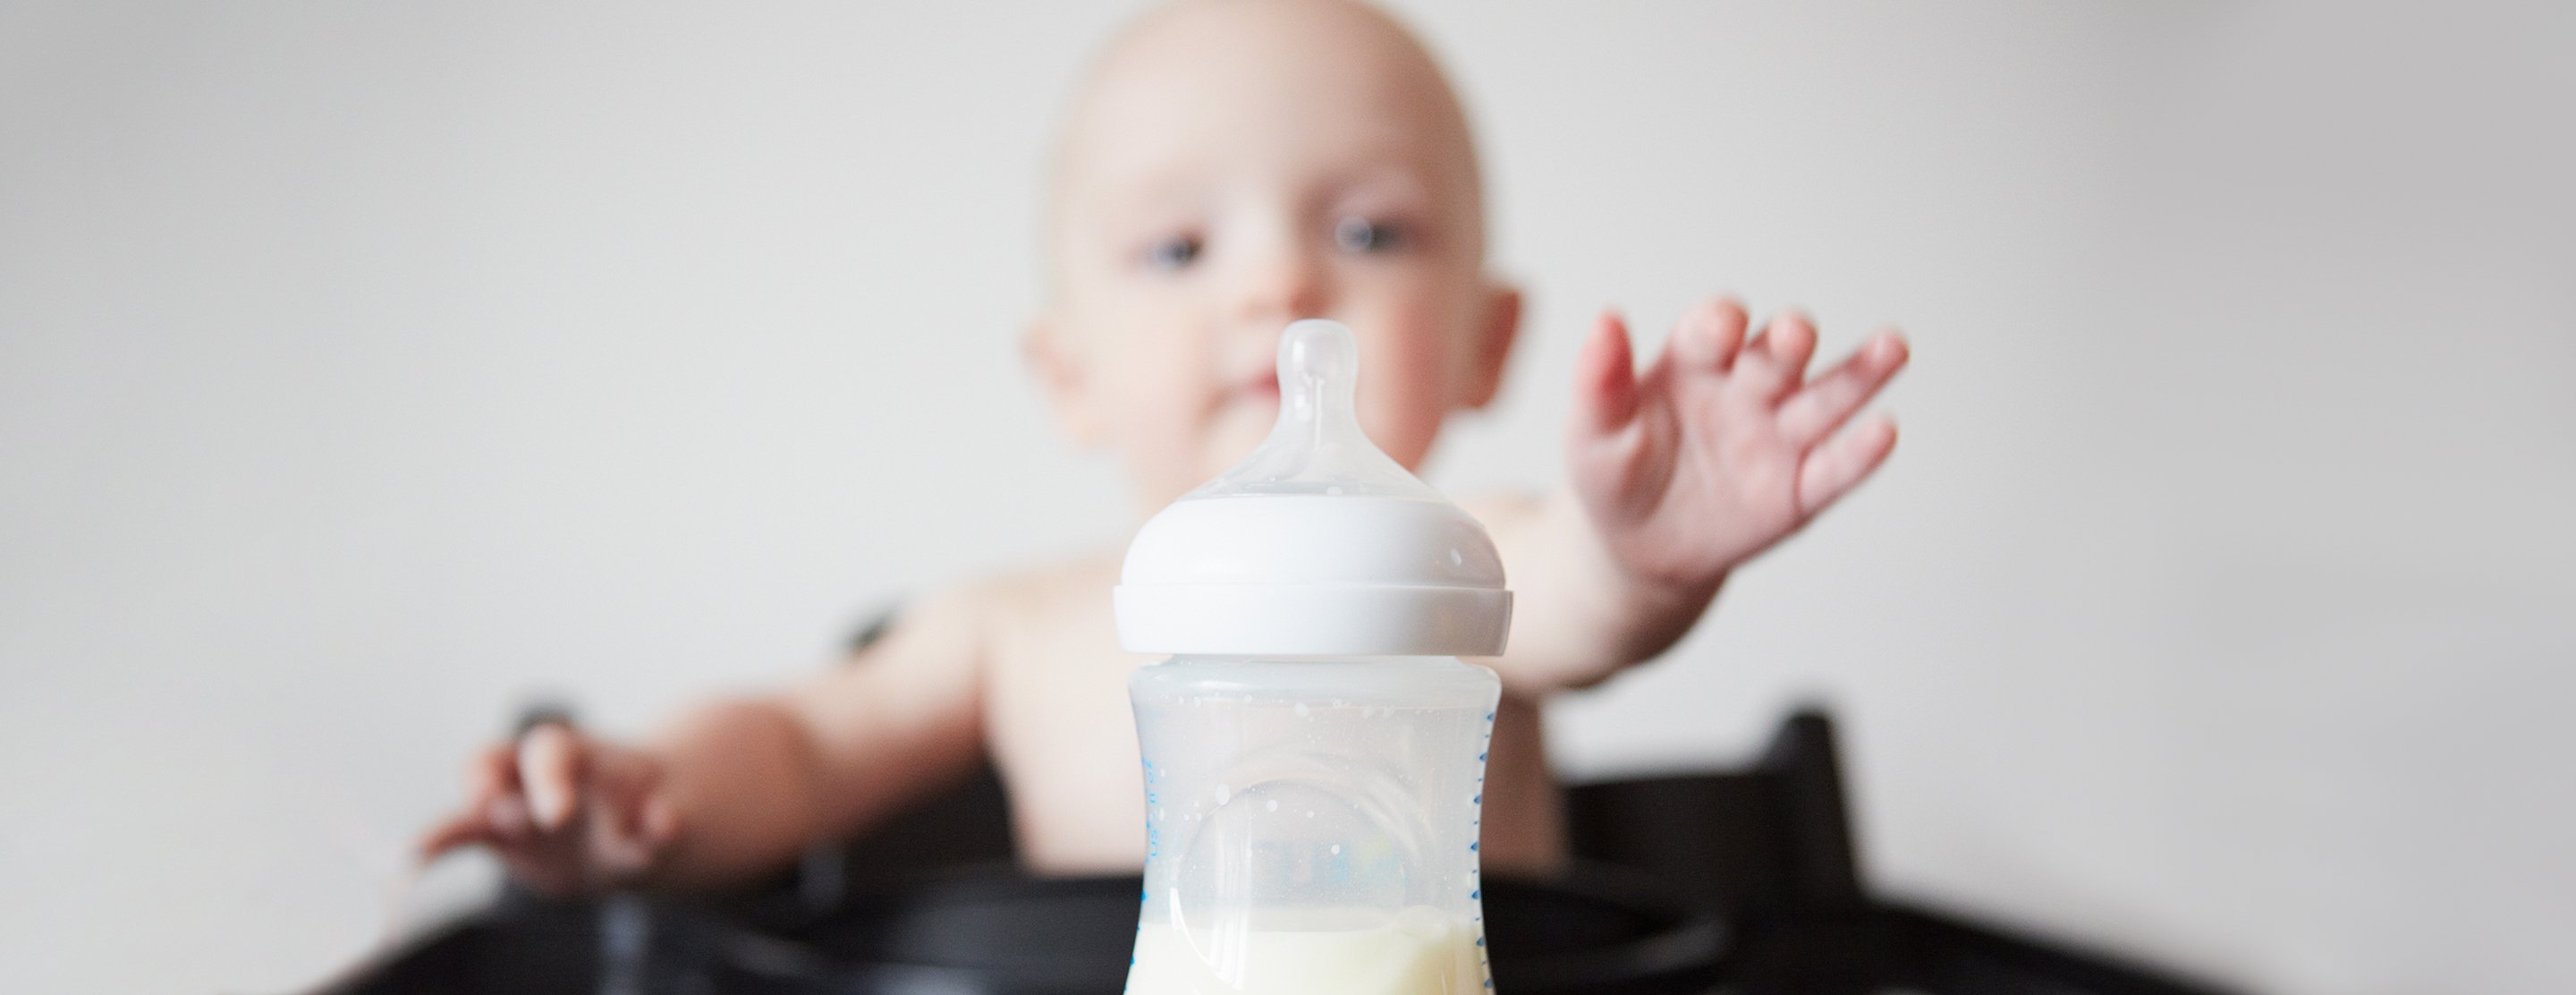 When, Why and How to Transitioning From a Bottle to Cup?